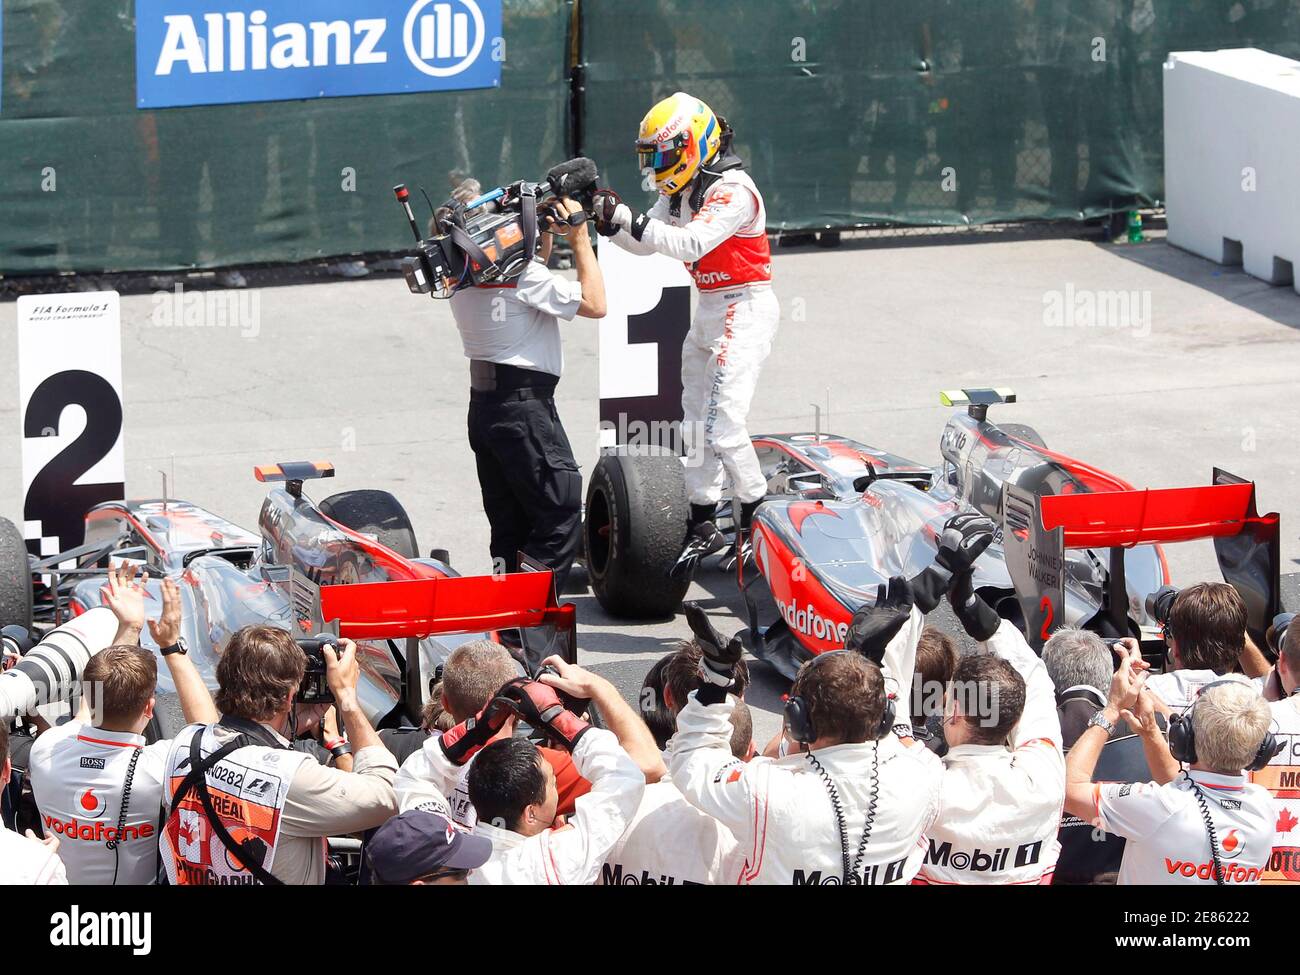 McLaren Formula One driver Lewis Hamilton of Britain celebrates after winning the Canadian F1 Grand Prix in Montreal, June 13, 2010.      REUTERS/Chris Wattie (CANADA - Tags: SPORT MOTOR RACING) Stock Photo